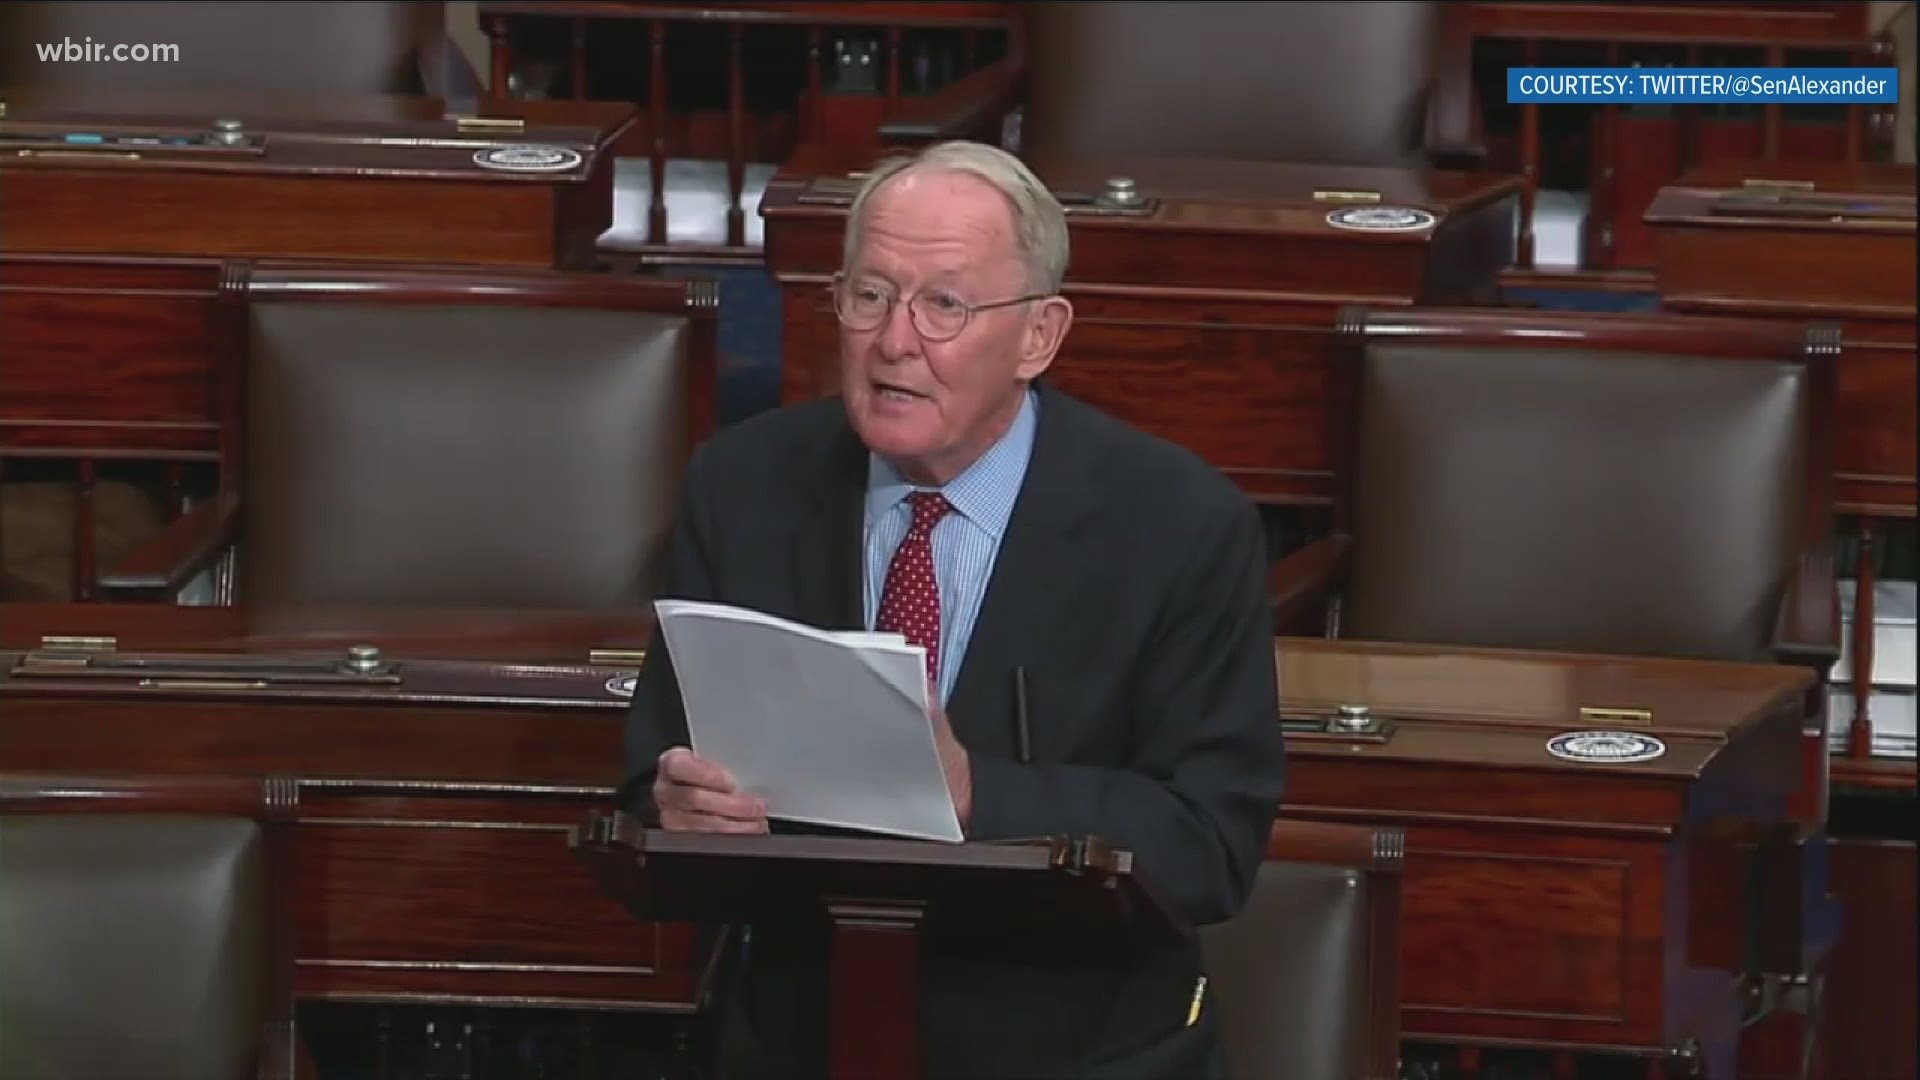 Today in Washington, Tennessee Senator Lamar Alexander said the U.S. should go ahead and invest in preparations for any future pandemic.